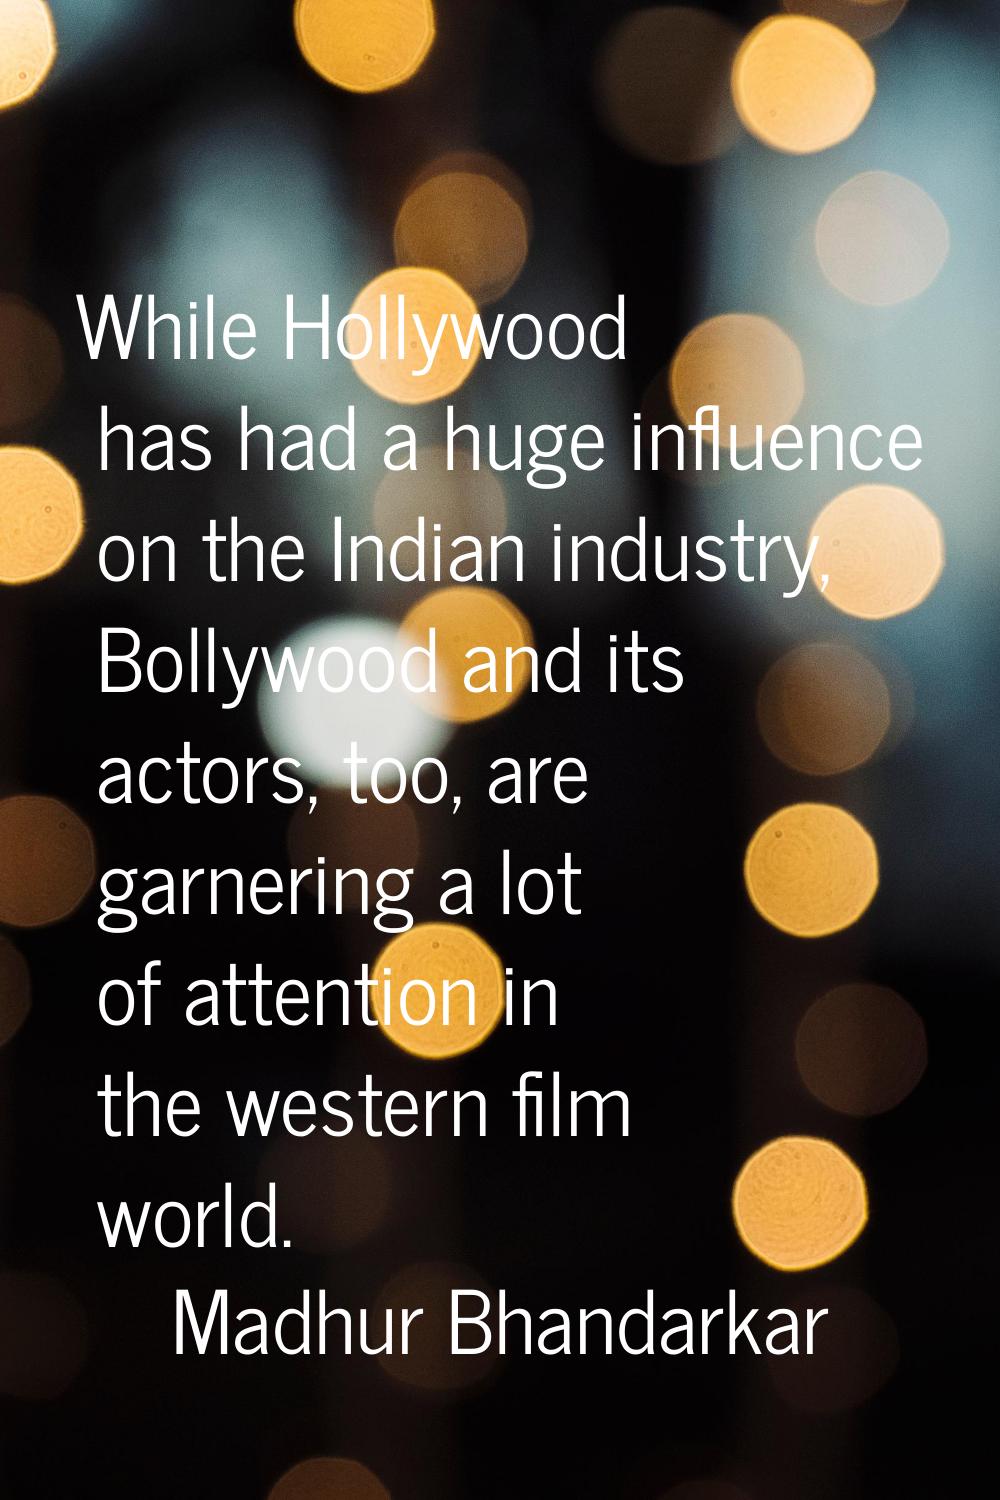 While Hollywood has had a huge influence on the Indian industry, Bollywood and its actors, too, are